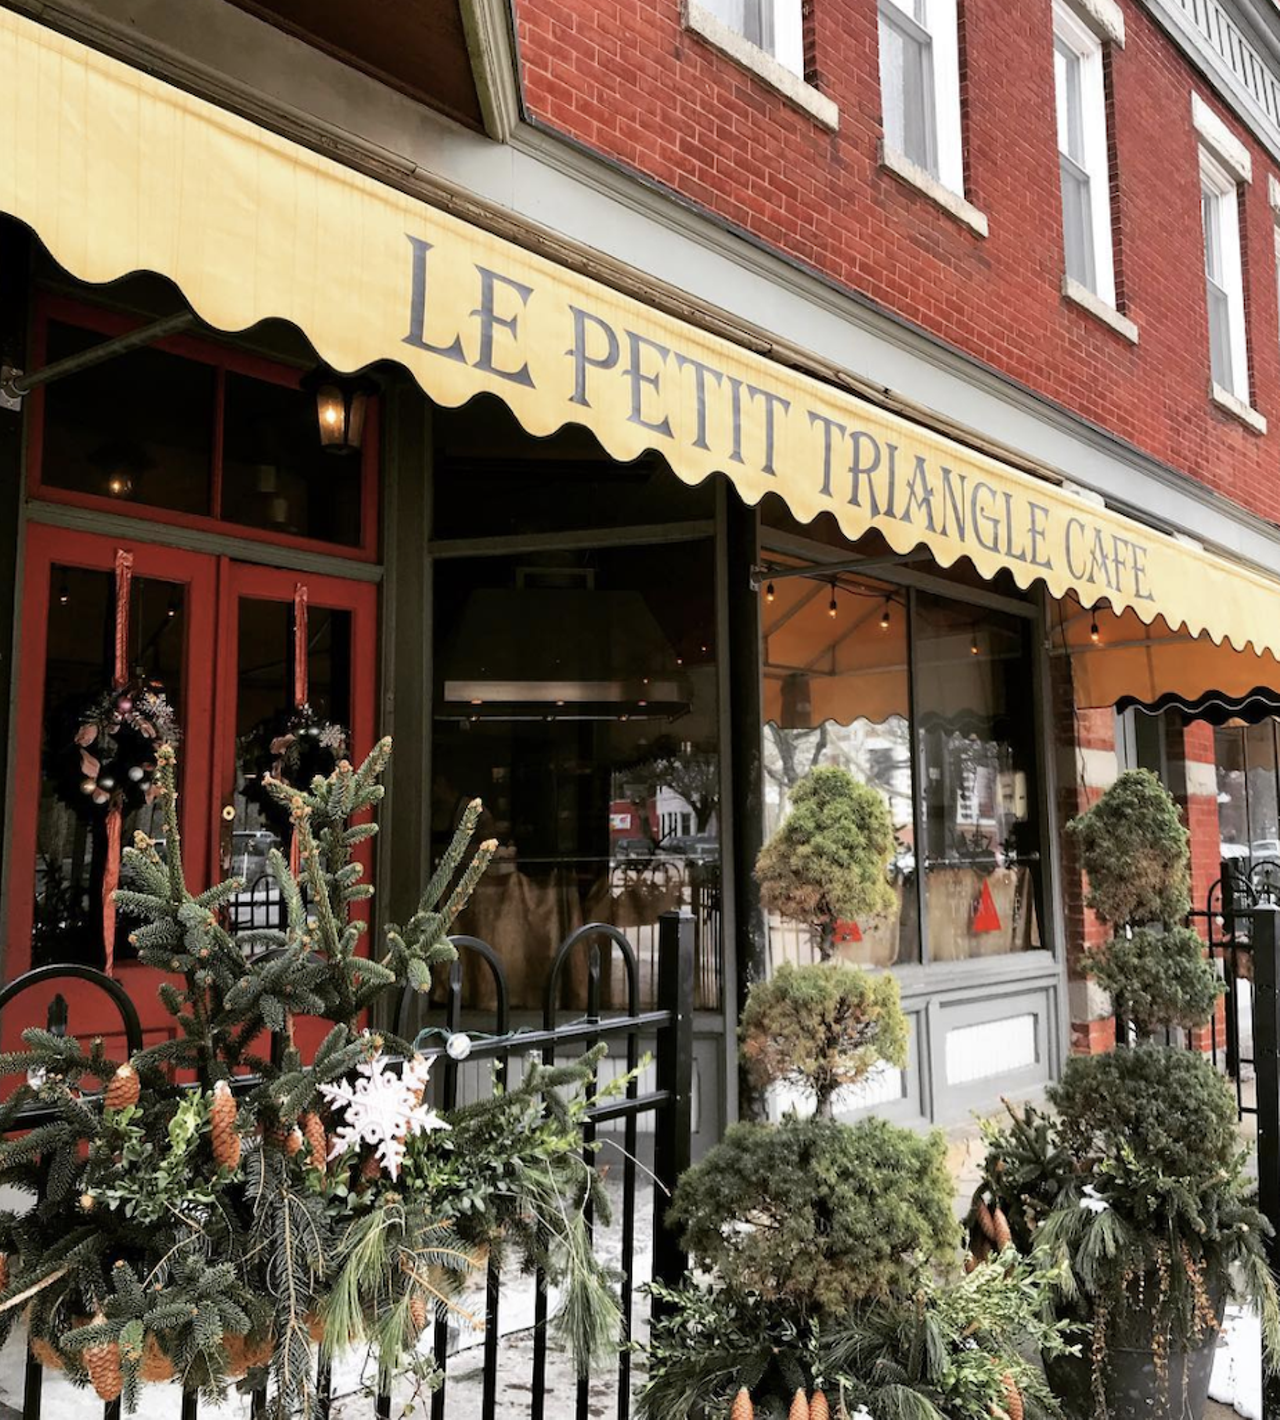  Le Petit Triangle
1881 Fulton Ave., Cleveland 
A little cramped, occasionally noisy, and quite possibly the city's smallest restaurant, this quaint French bistro still manages to turn out superlative crepes, earthy pâtés, and one of the best Croque Monsieur sandwiches this side of the Seine. You’ll be transported to Paris for a couple hours here. Over the years, owners Tom and Joy Harlor have made incremental improvements to the space, food and vibe, but the Triangle has always stayed true to its original mission to serve the neighborhood.